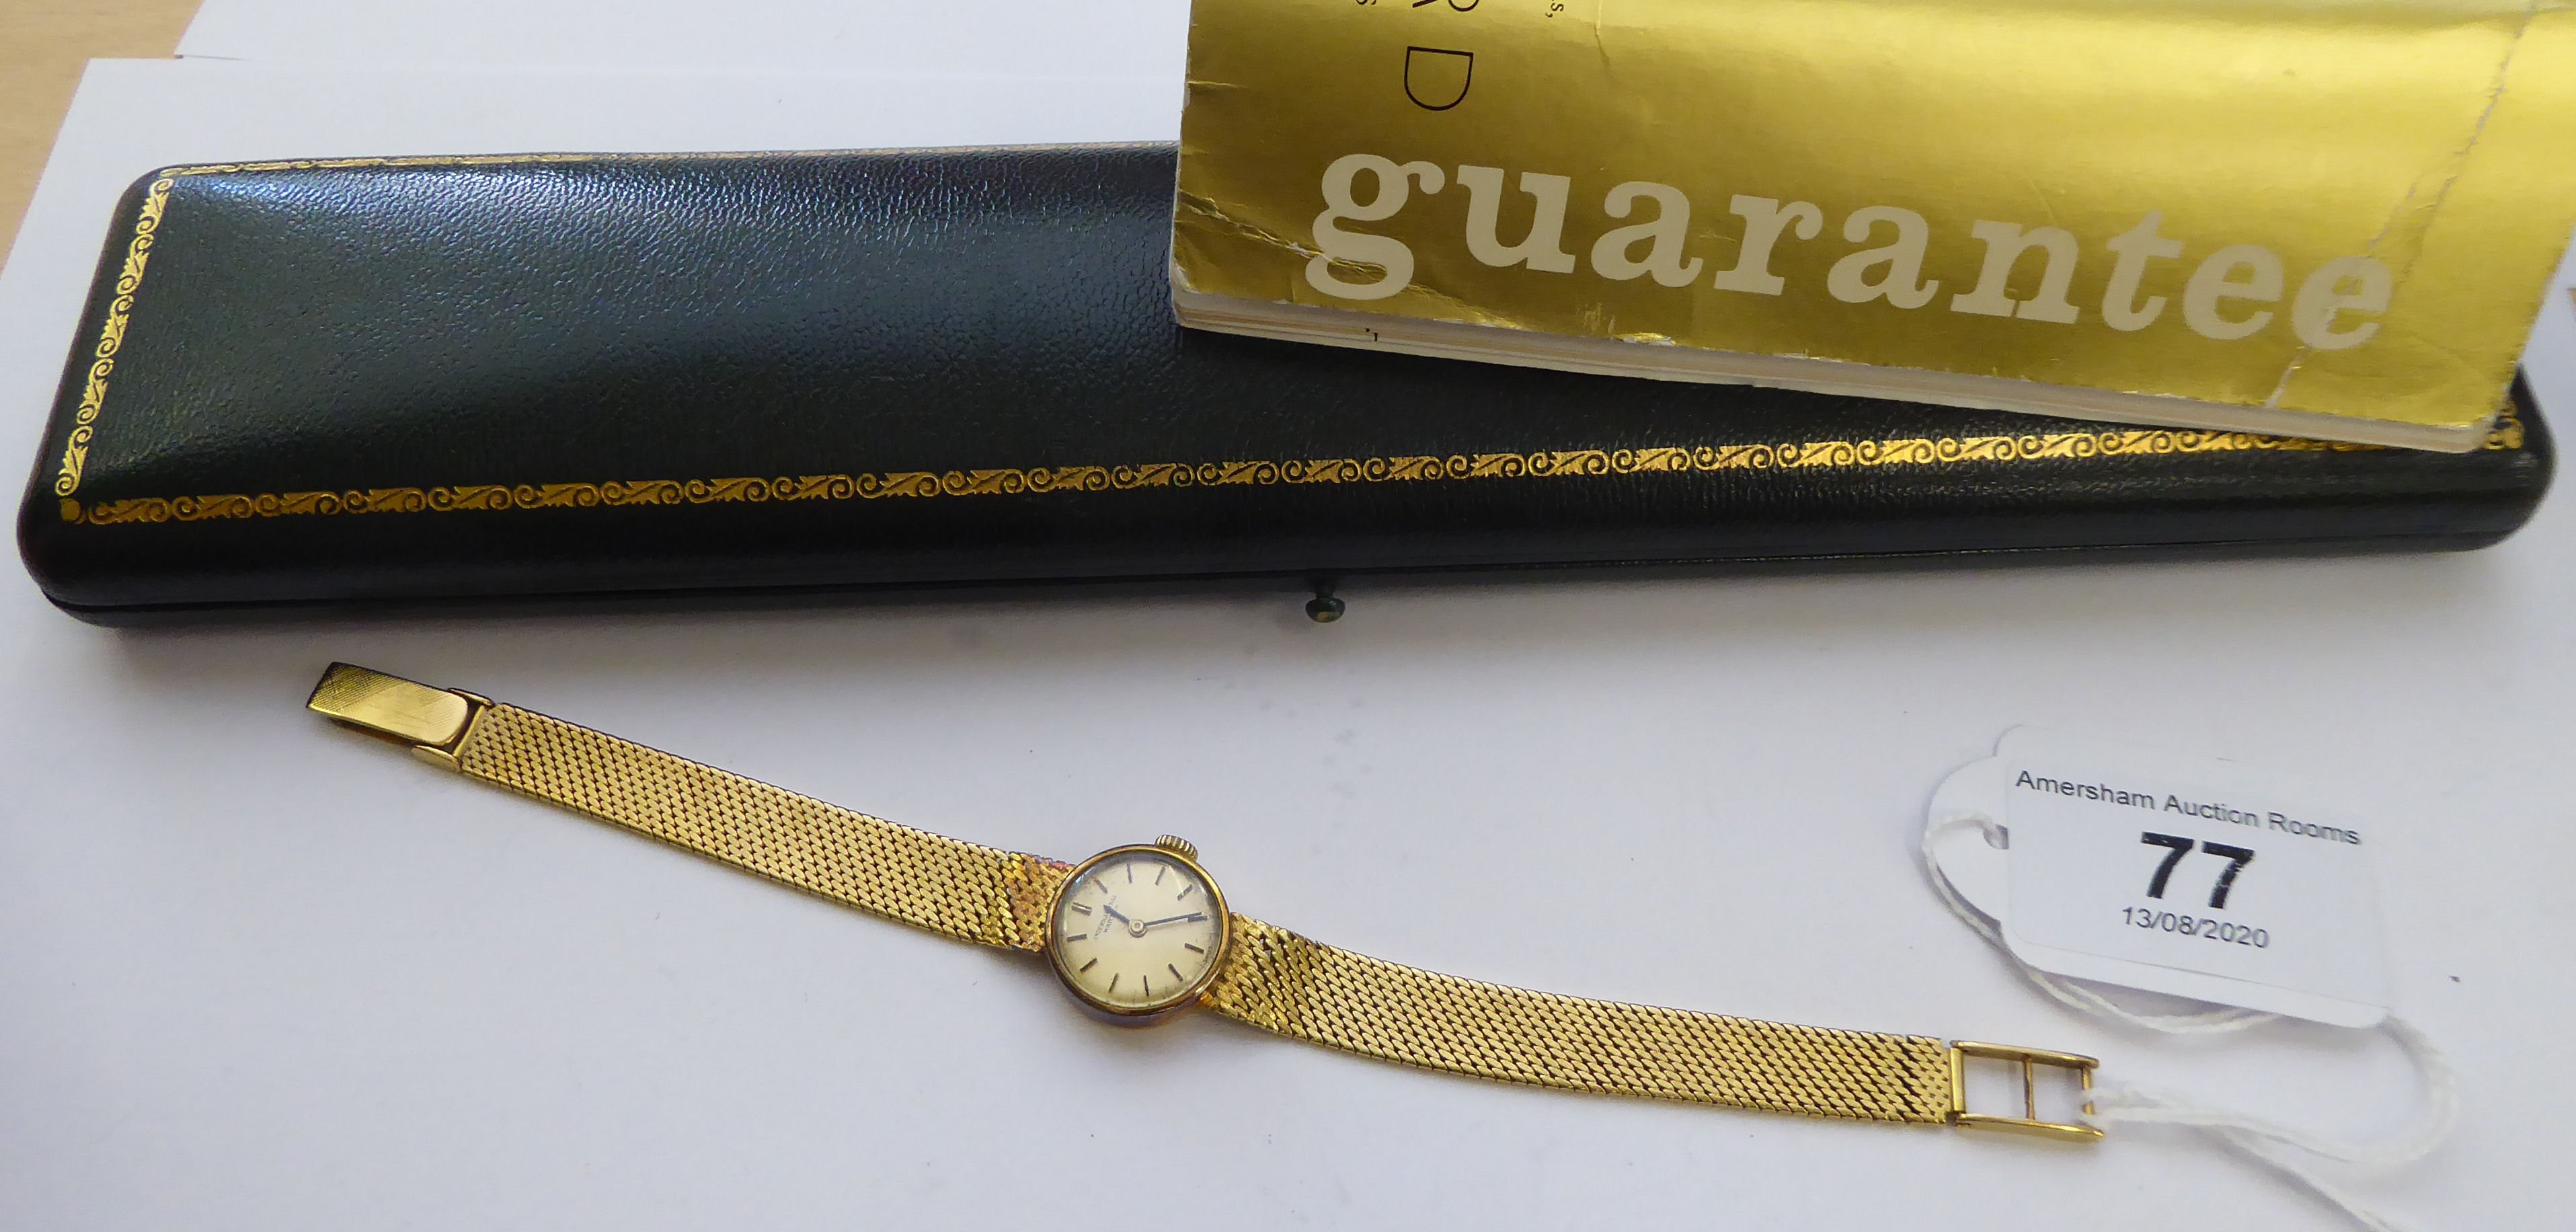 A 1960s 18ct gold cased IWC (International Watch Co) wristwatch, - Image 2 of 3